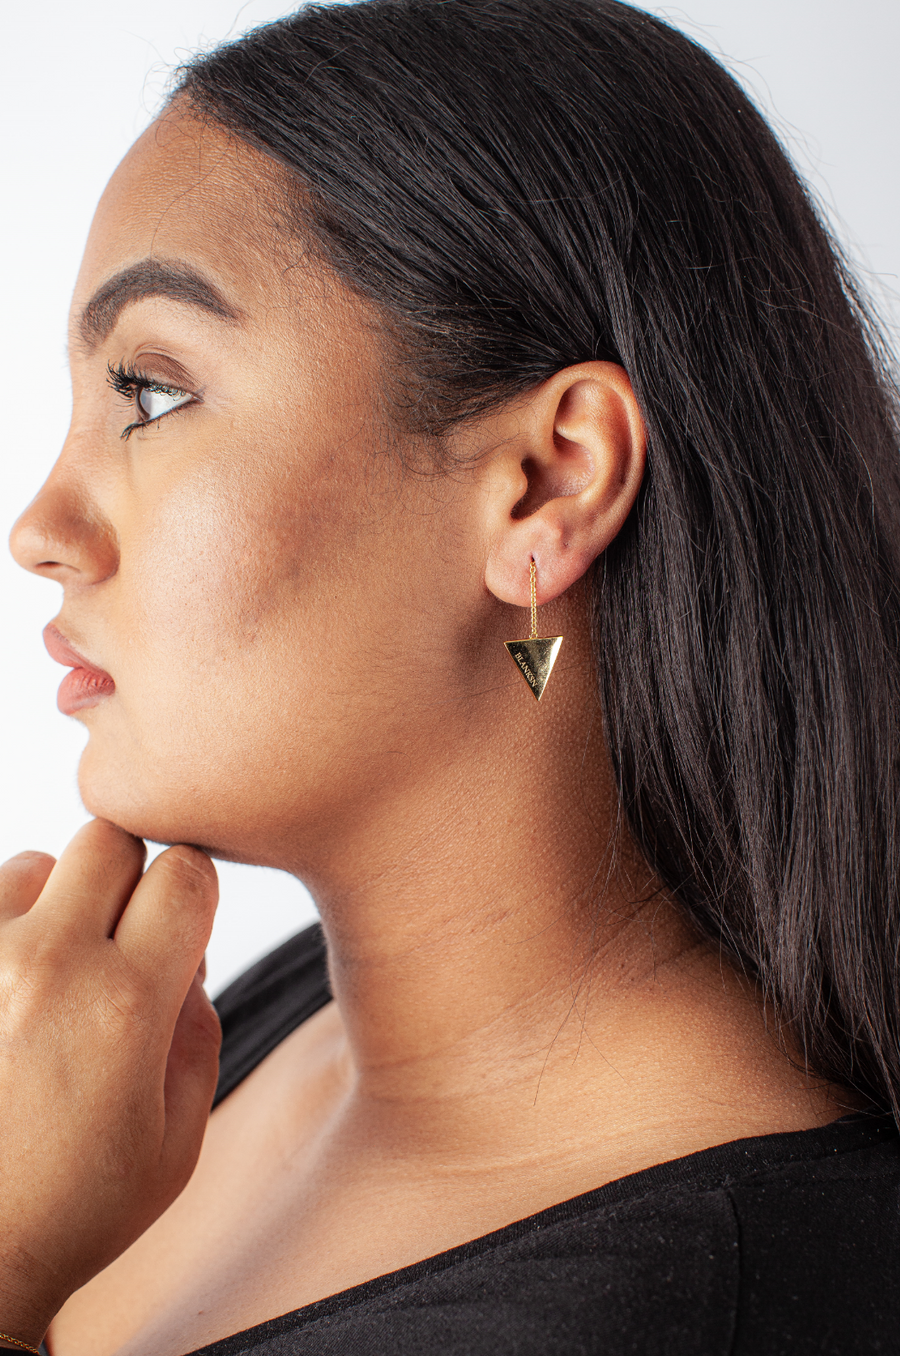 Woman showing off gold triangular empowering earrings